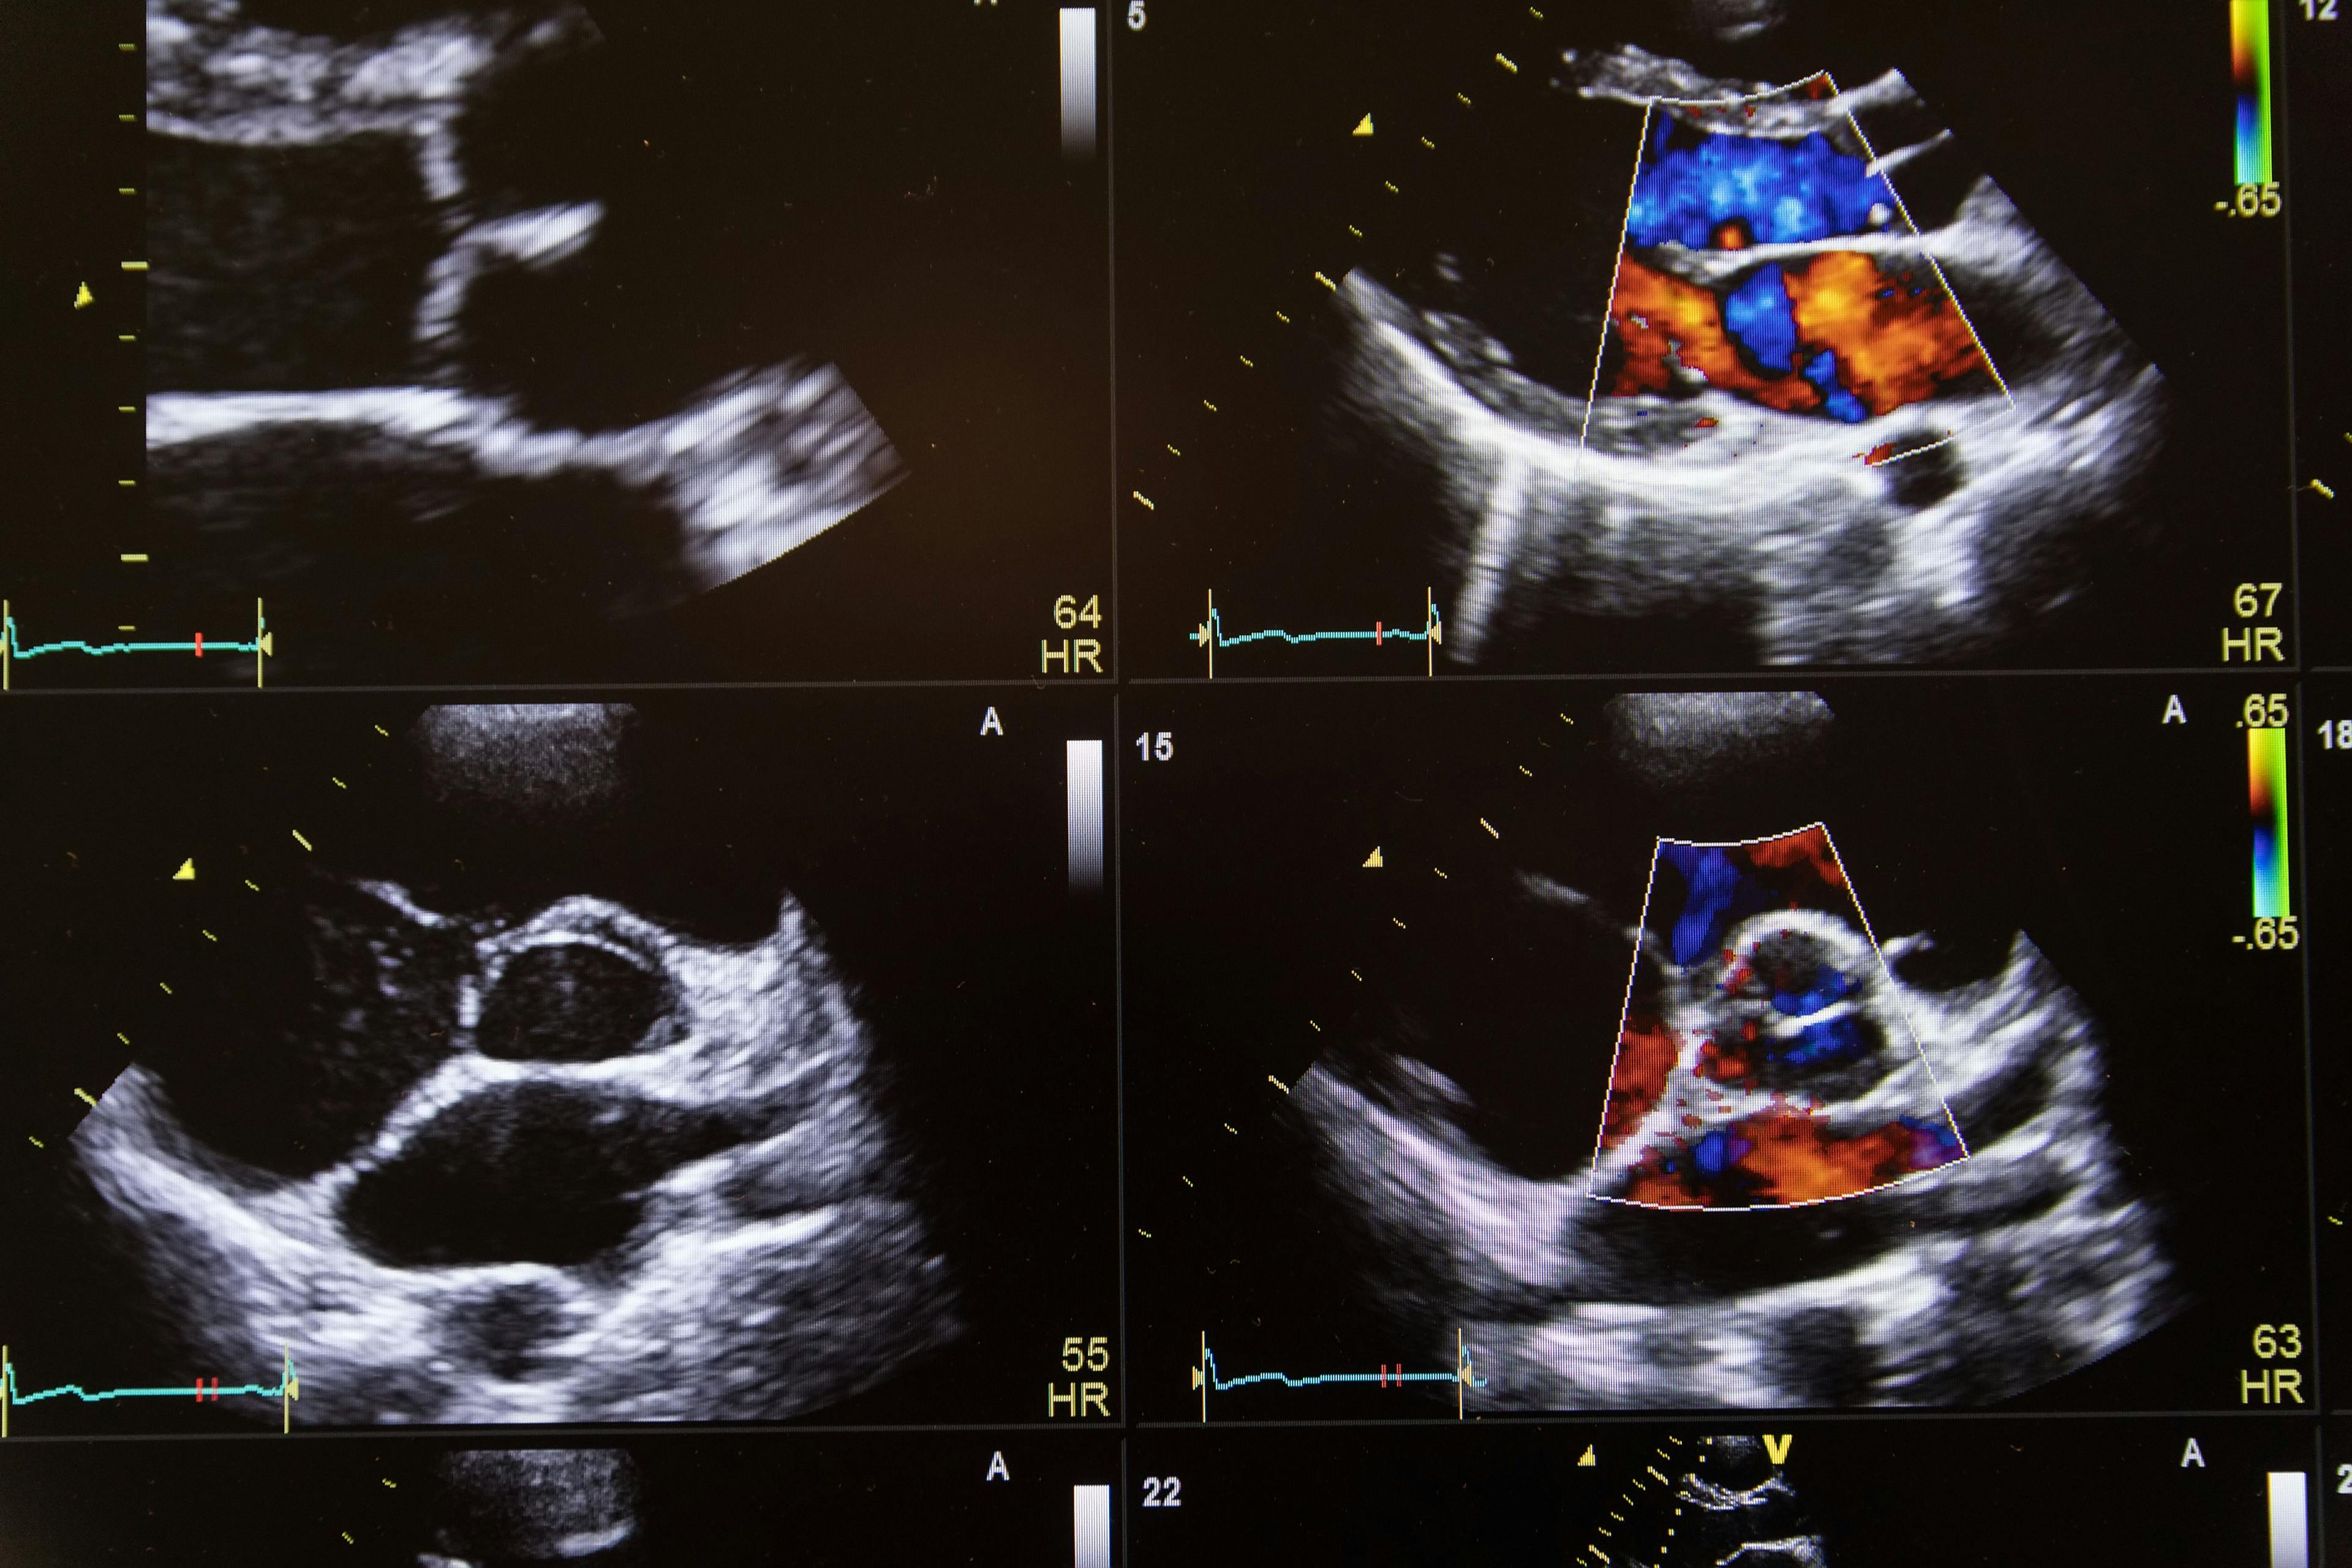 Do you need to review the images of an ultrasound study?